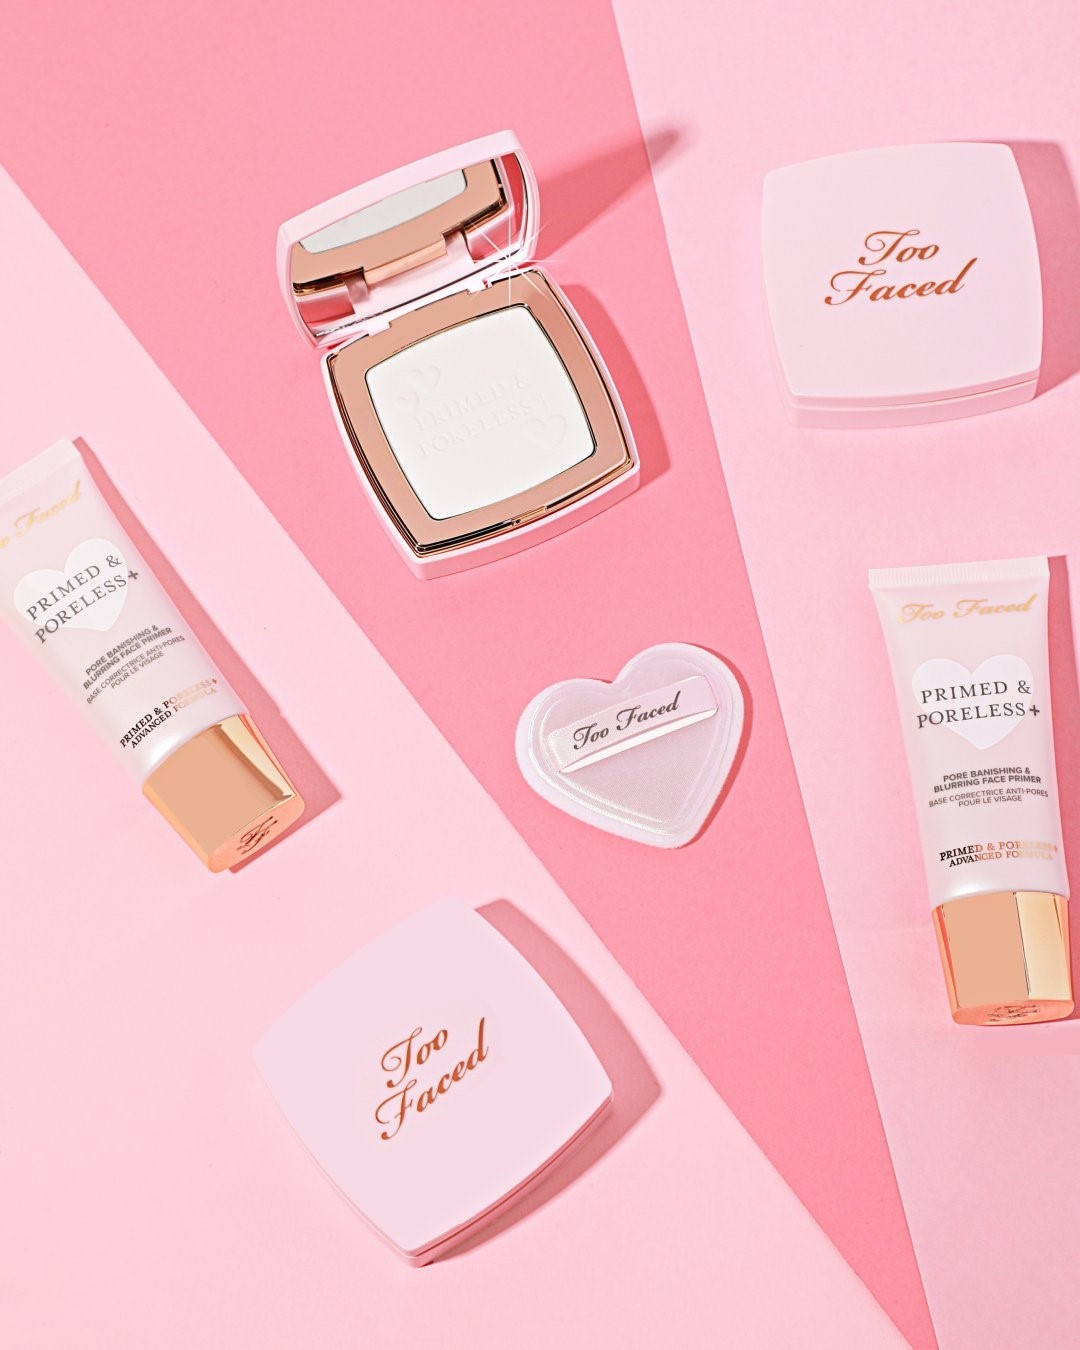 Too Faced Cosmetics - The must-haves in our makeup bag. 💖 Our Primed & Poreless Primer and Face Powder are your instant skin perfectors for a soft-focus finish. Stock up @ultabeauty! #tfprimedandporel...